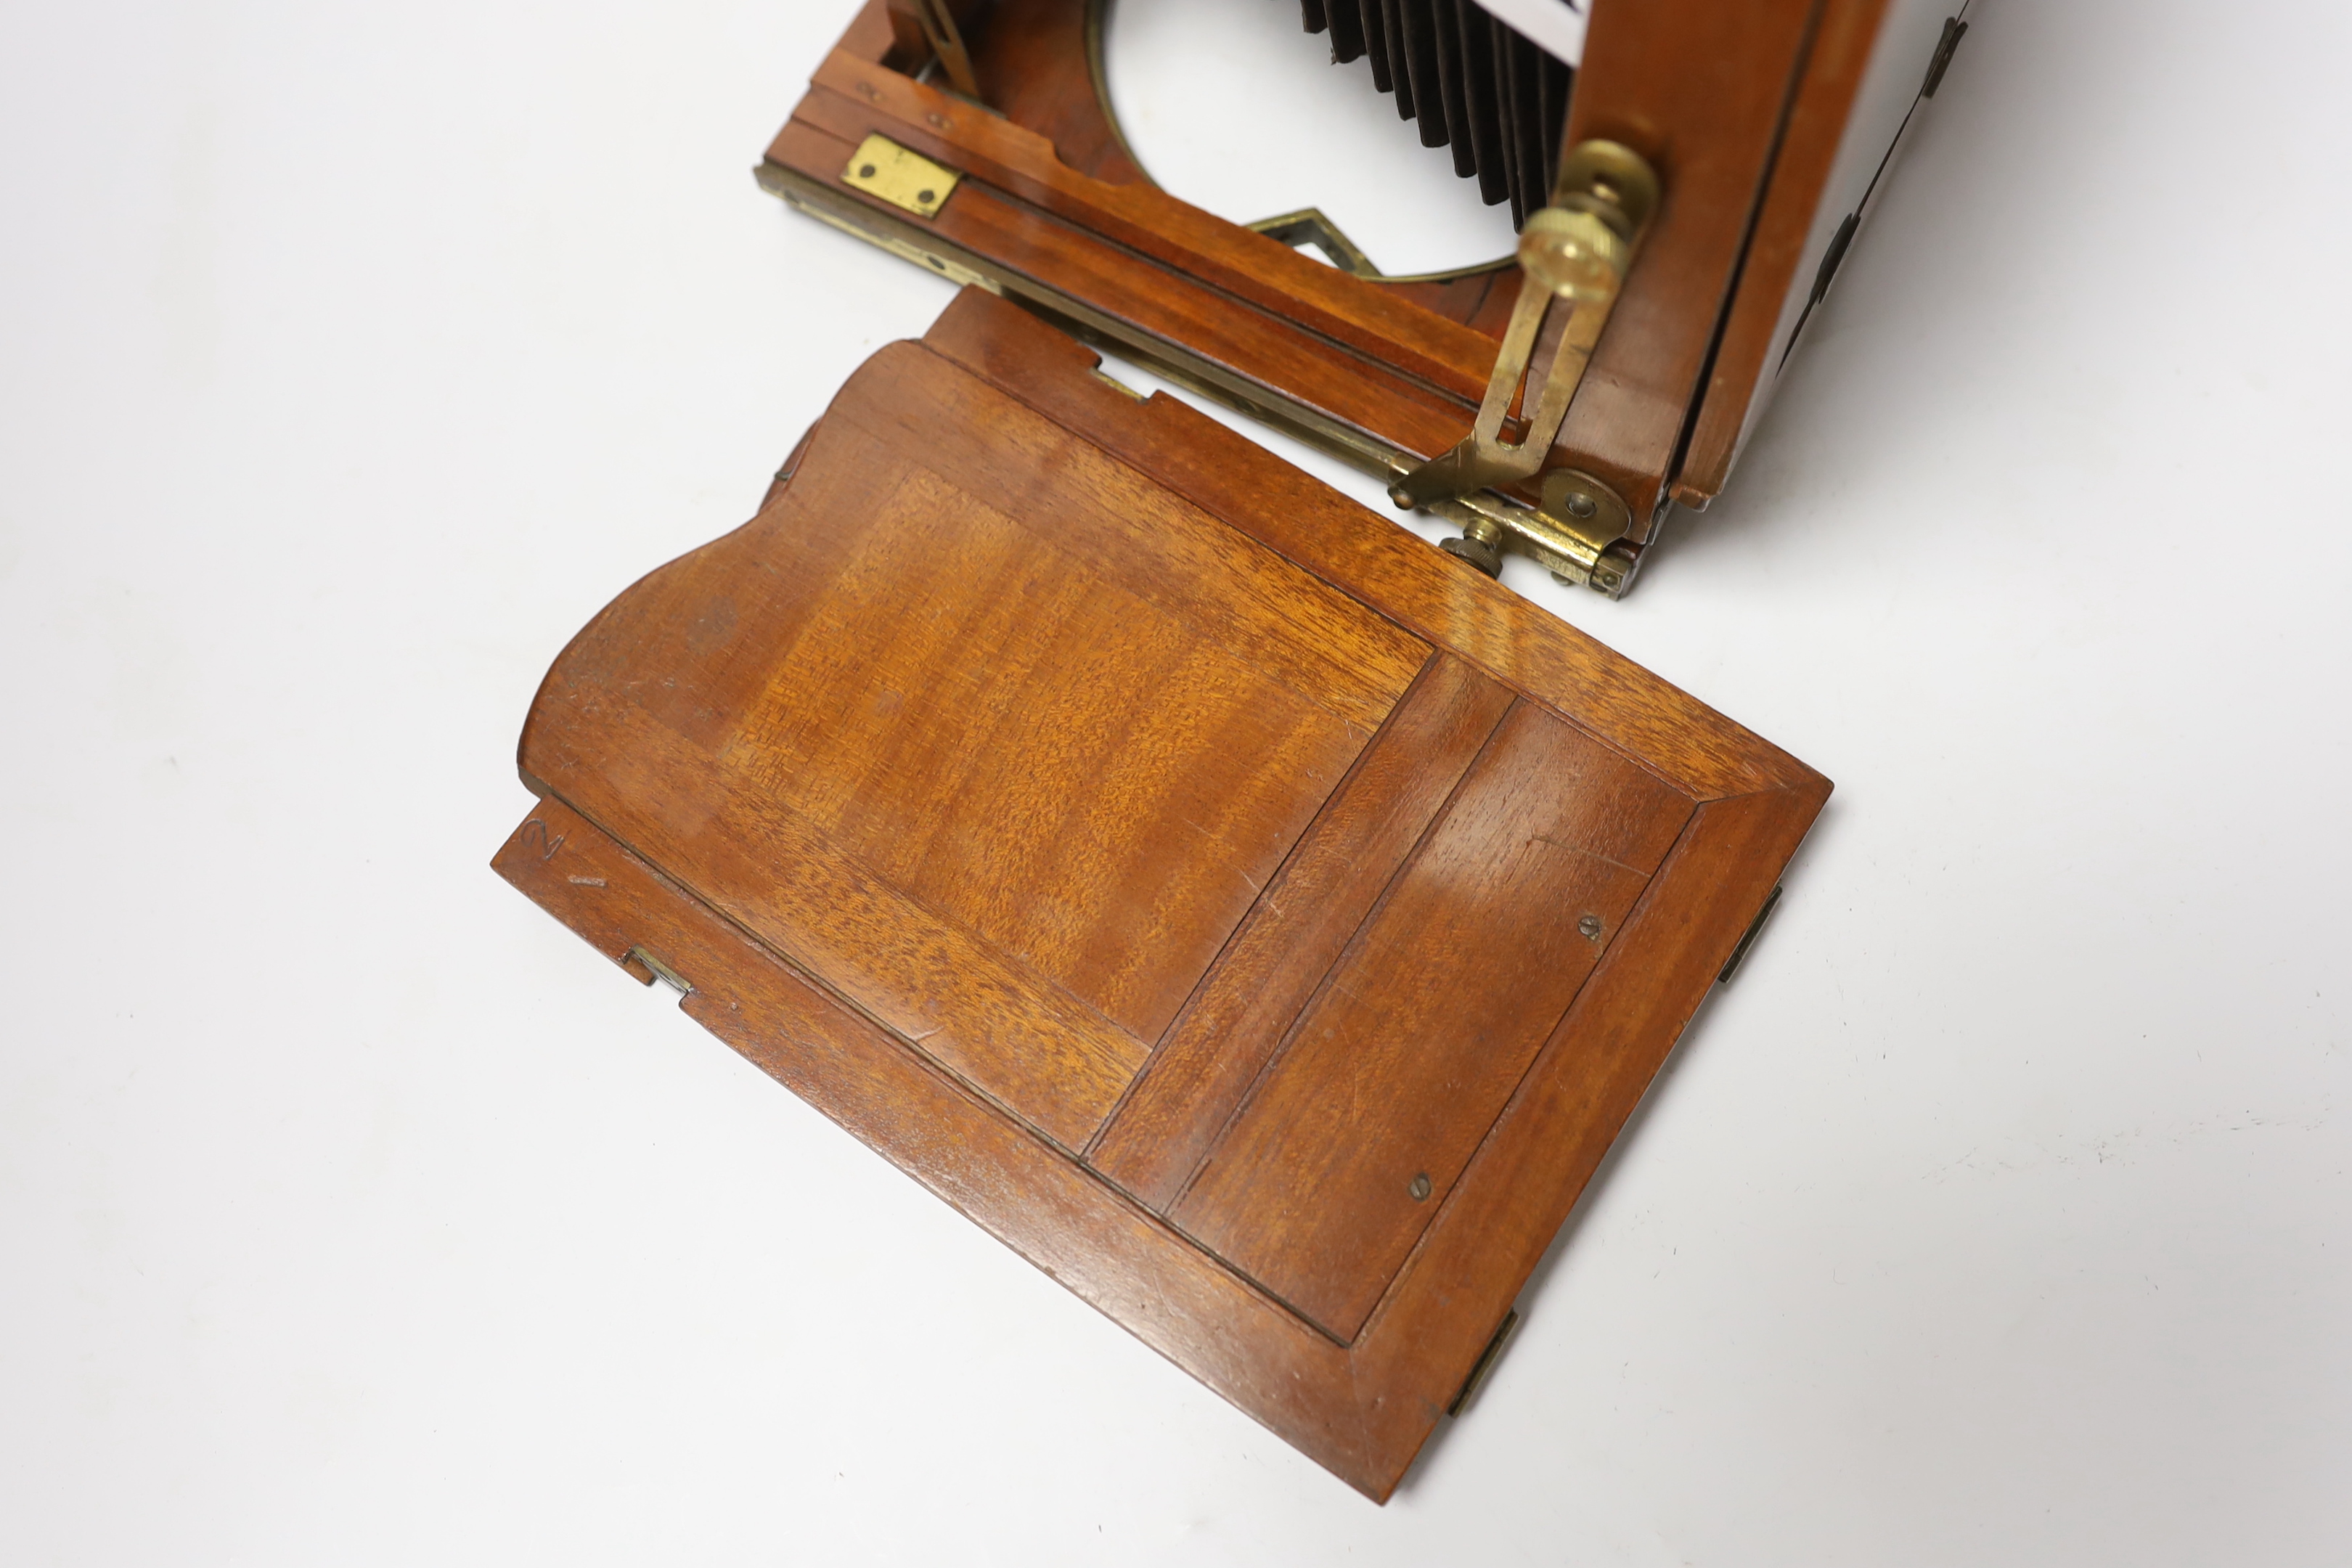 A late nineteenth century brass and mahogany half plate bellows camera with a lens and a shutter action by Taylor, Taylor & Hobson, Leicester, together with a negative holder